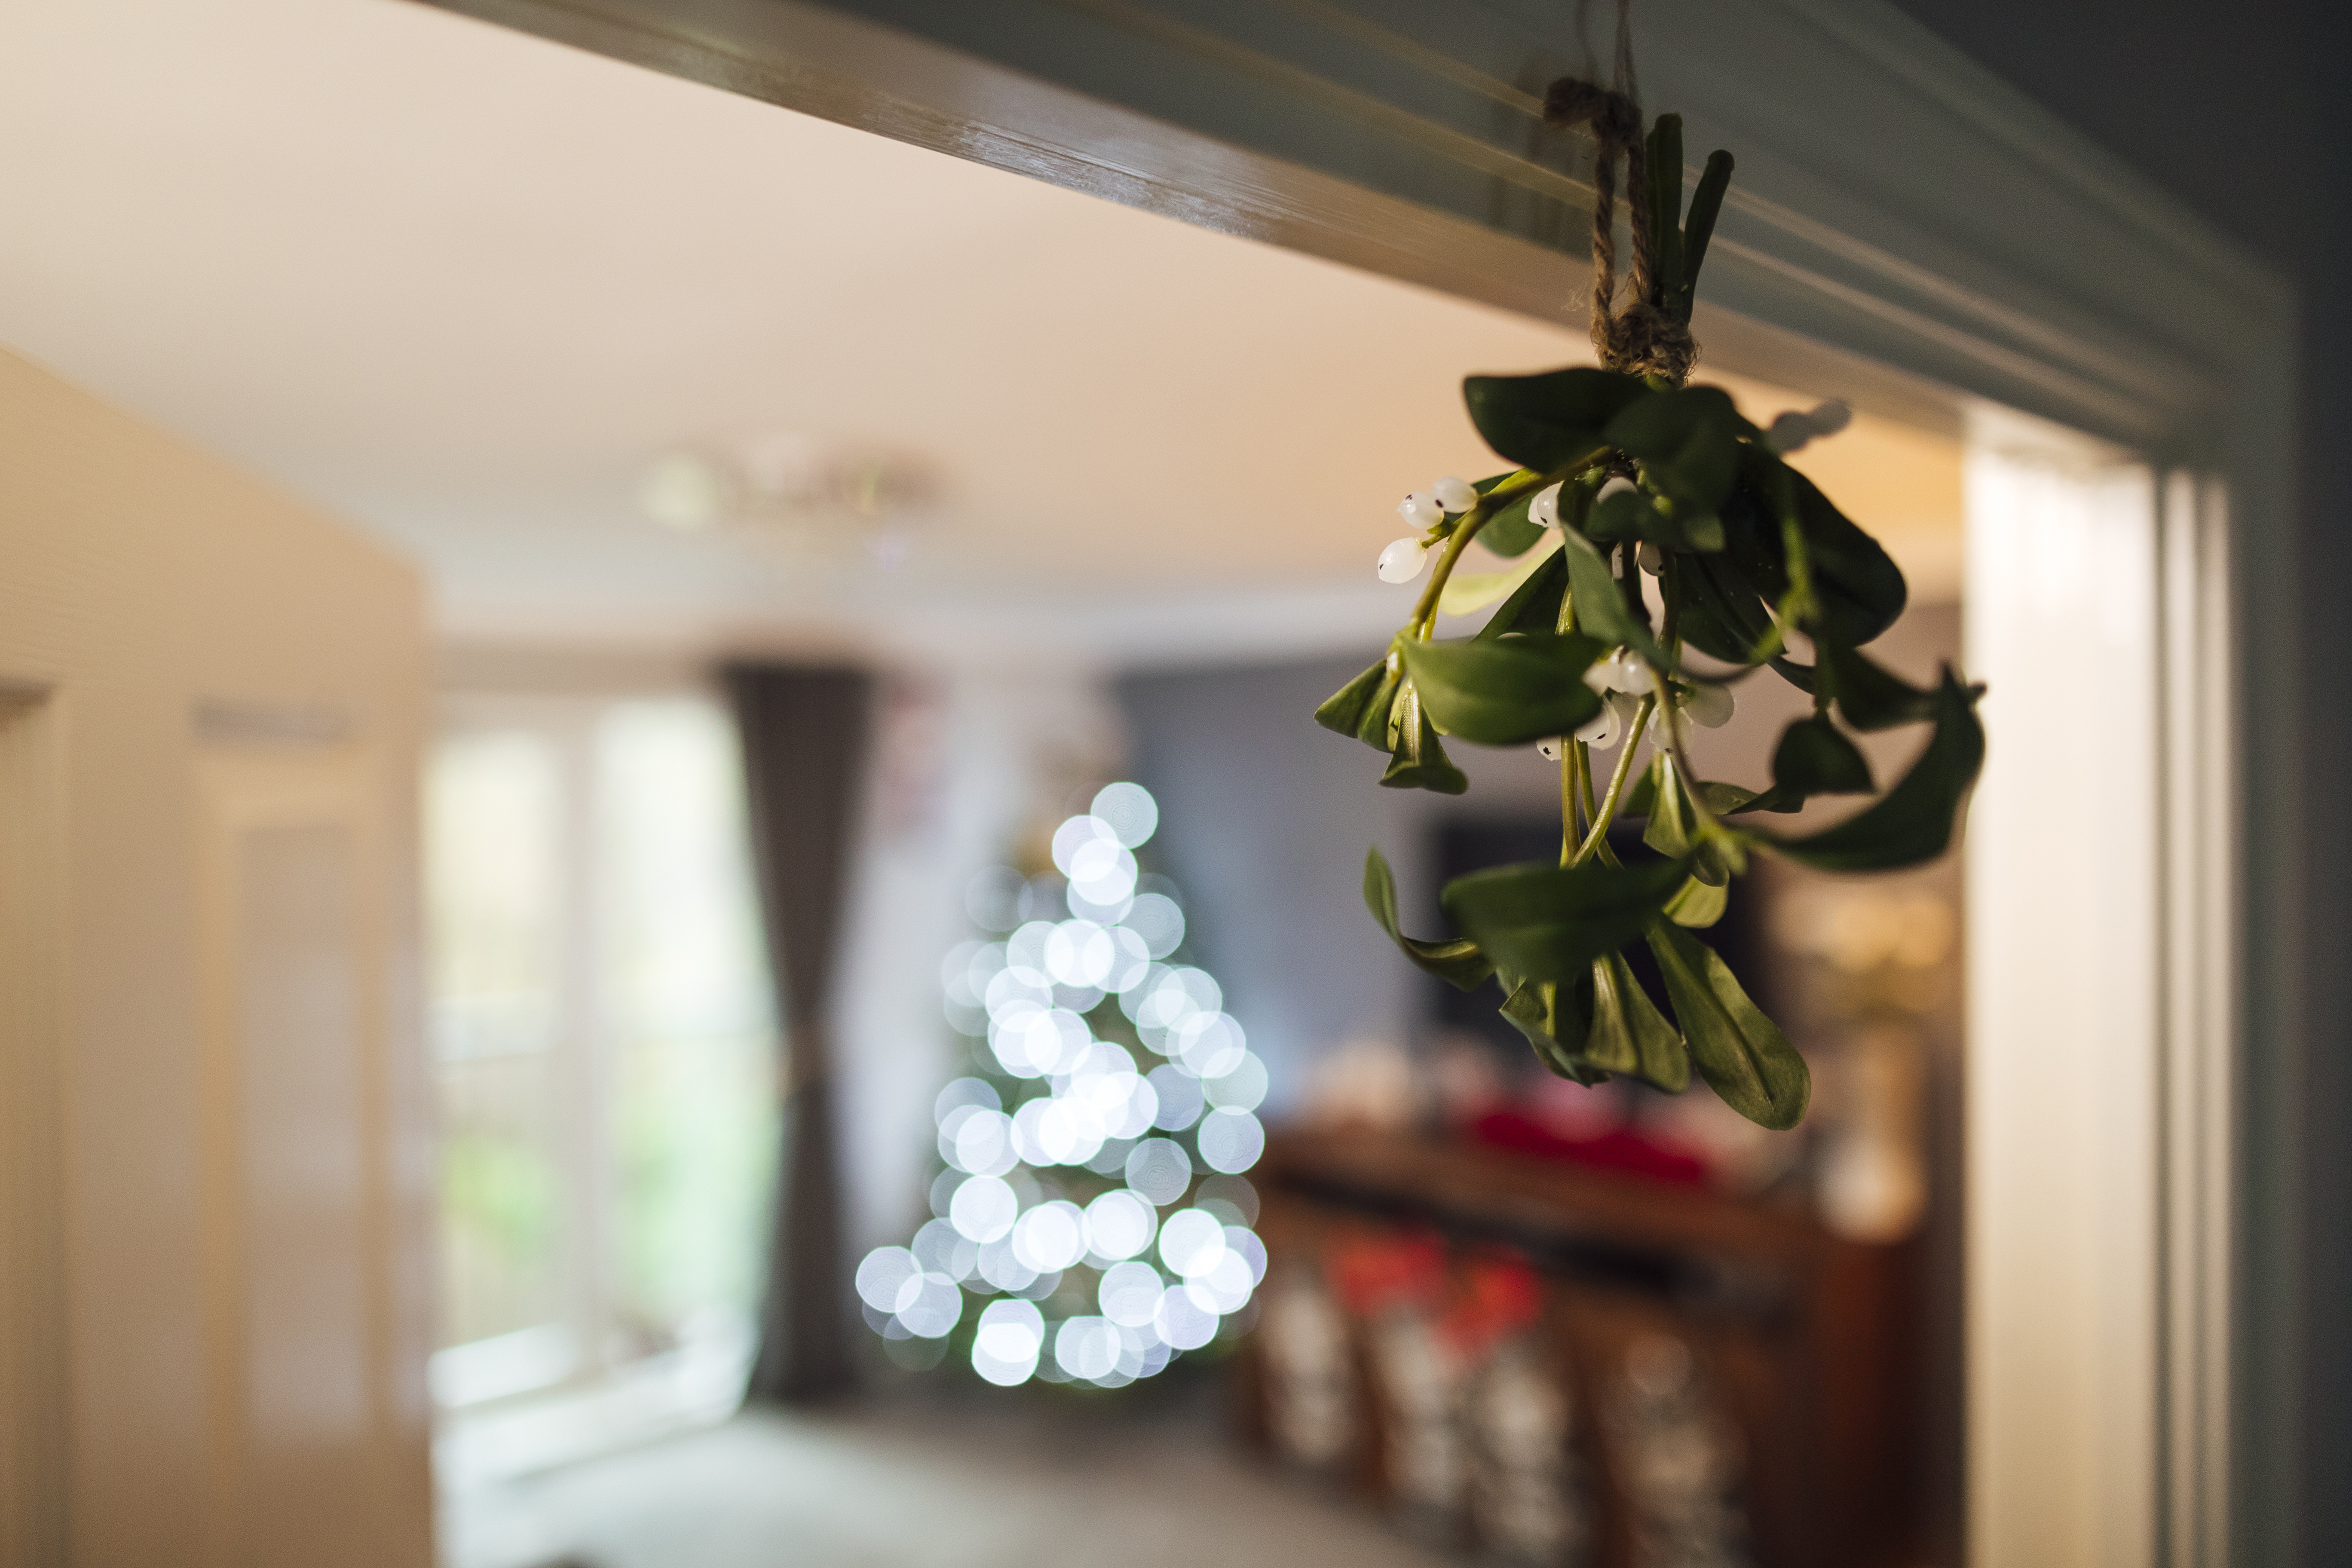 A close-up of mistletoe hanging up on a door frame in a house. The Christmas tree is lit up in the background, out of focus.